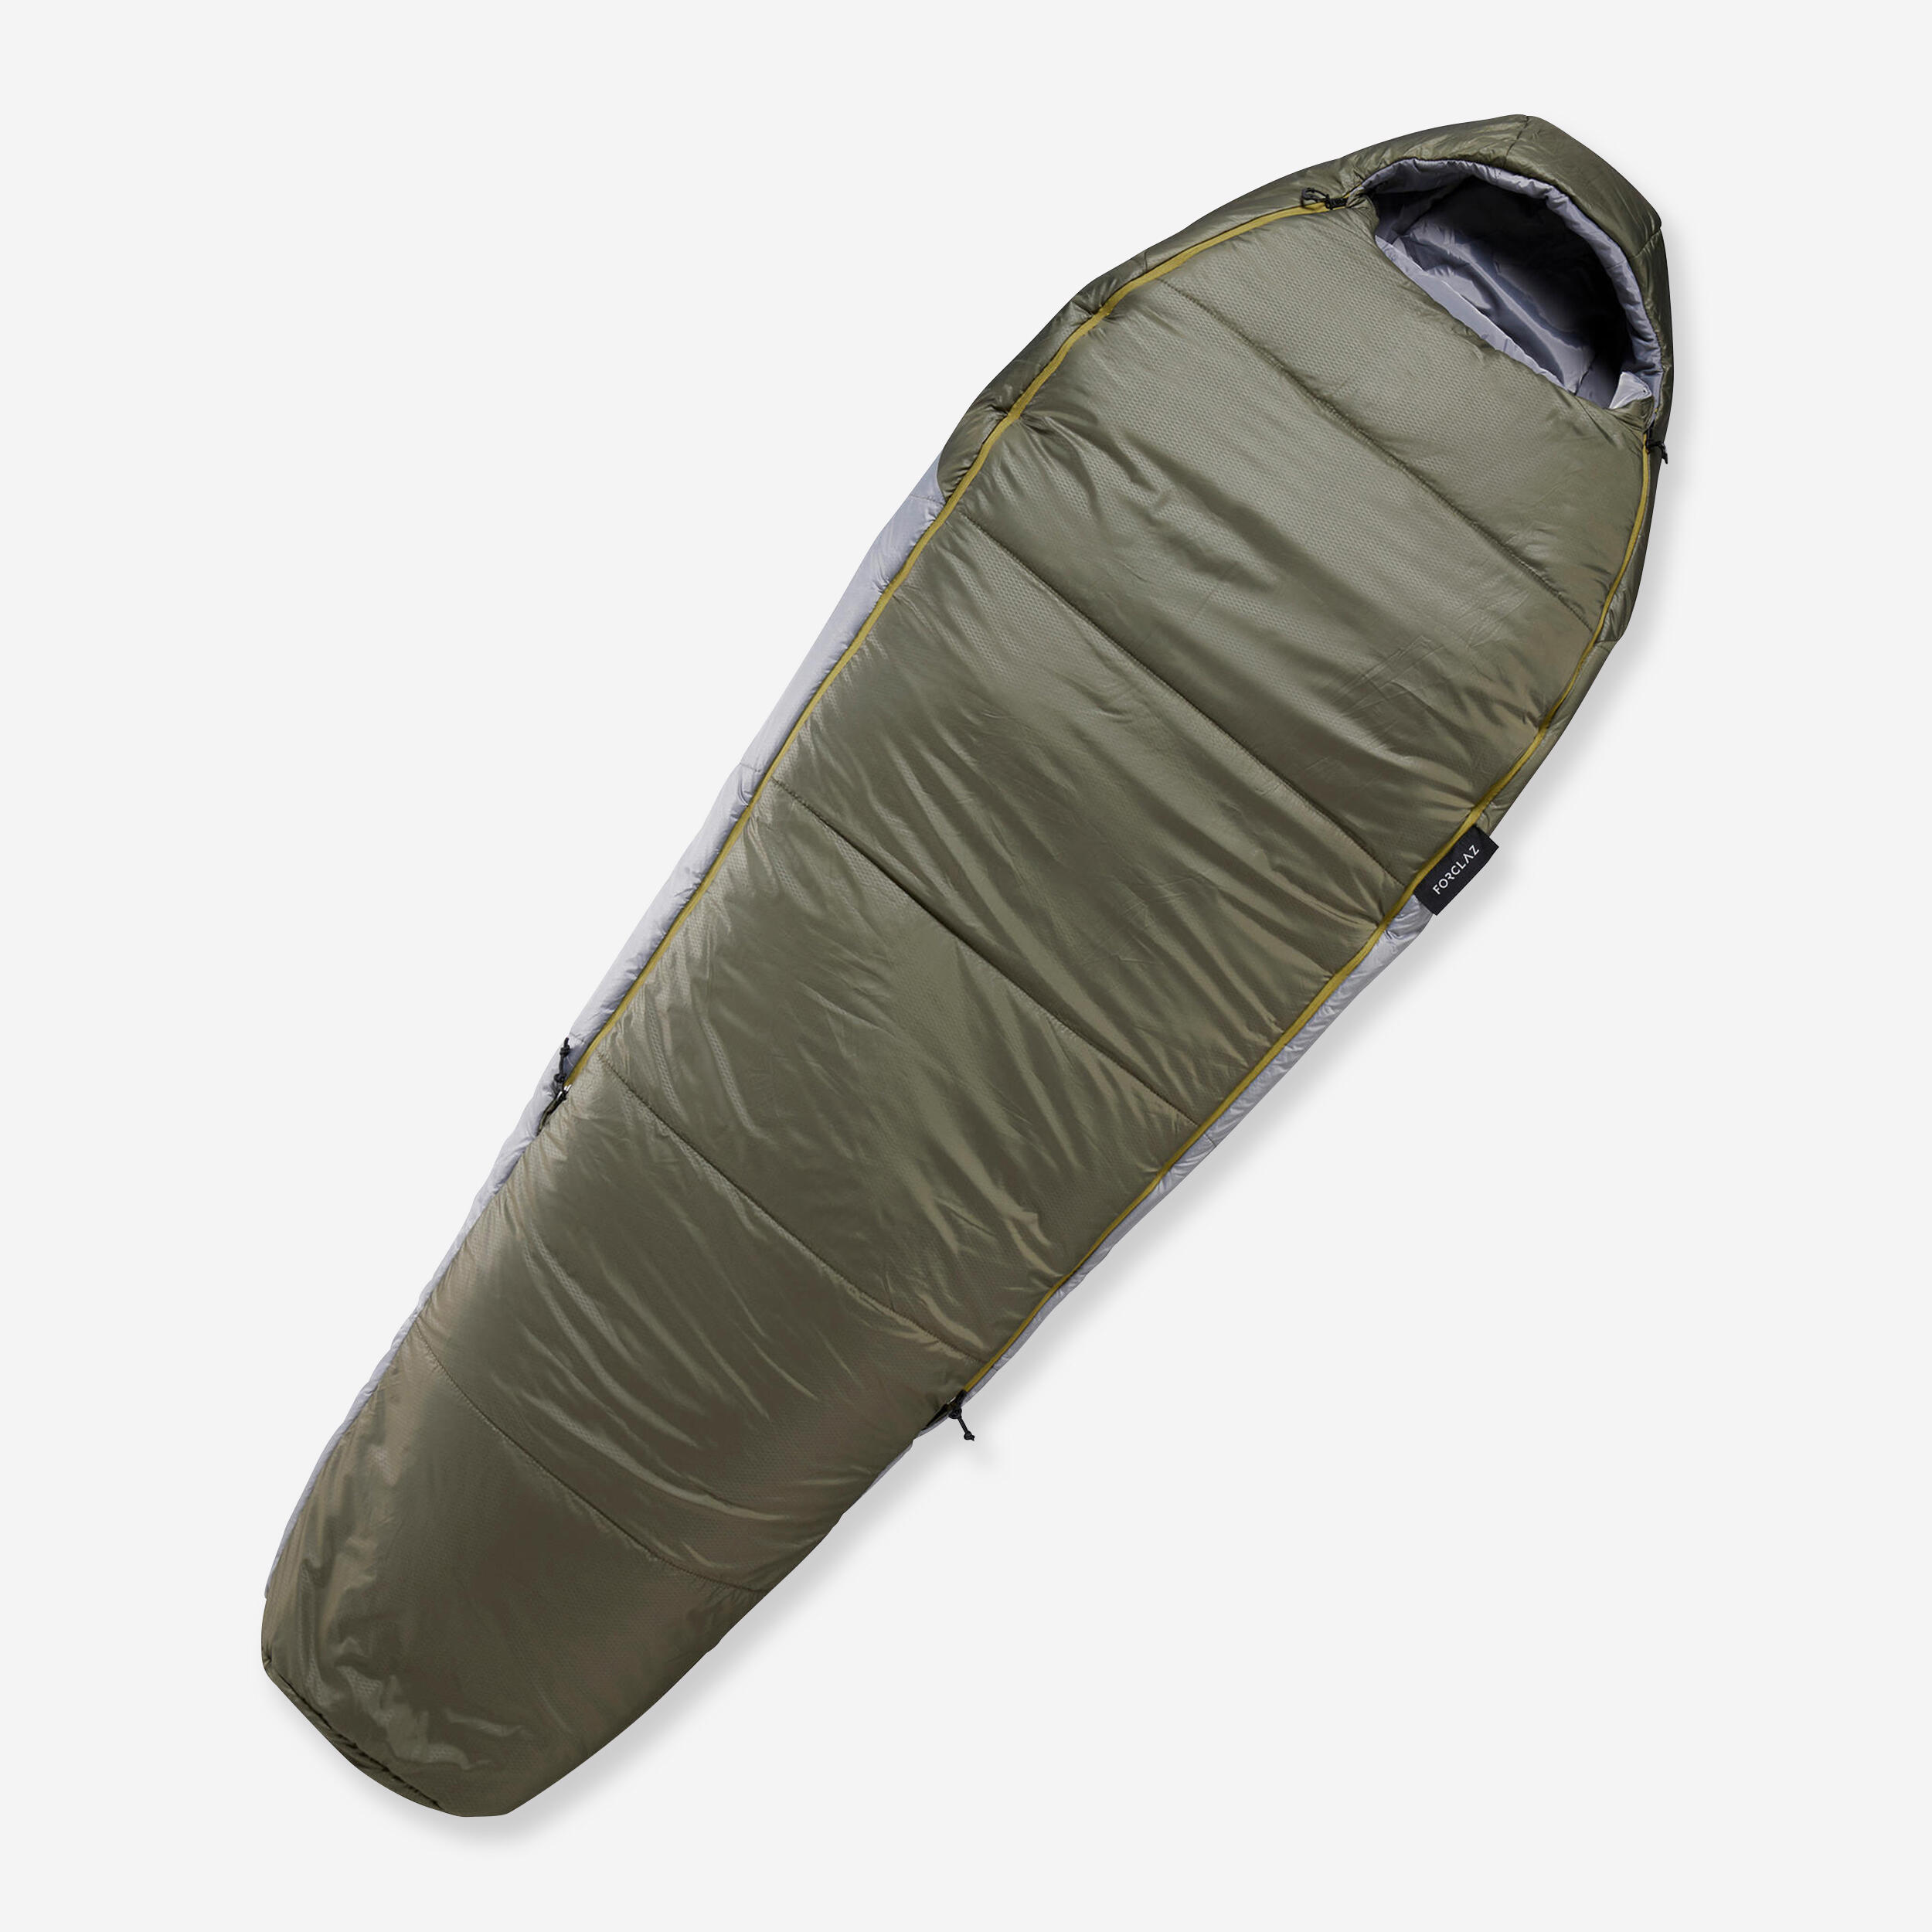 Sleep-in bag by Quechua is all you need for a comfortable nights sleep. It  has a self-inflating mattress, blow-up pillow and a zi… | Sleepin bed,  Mattress, Pillows